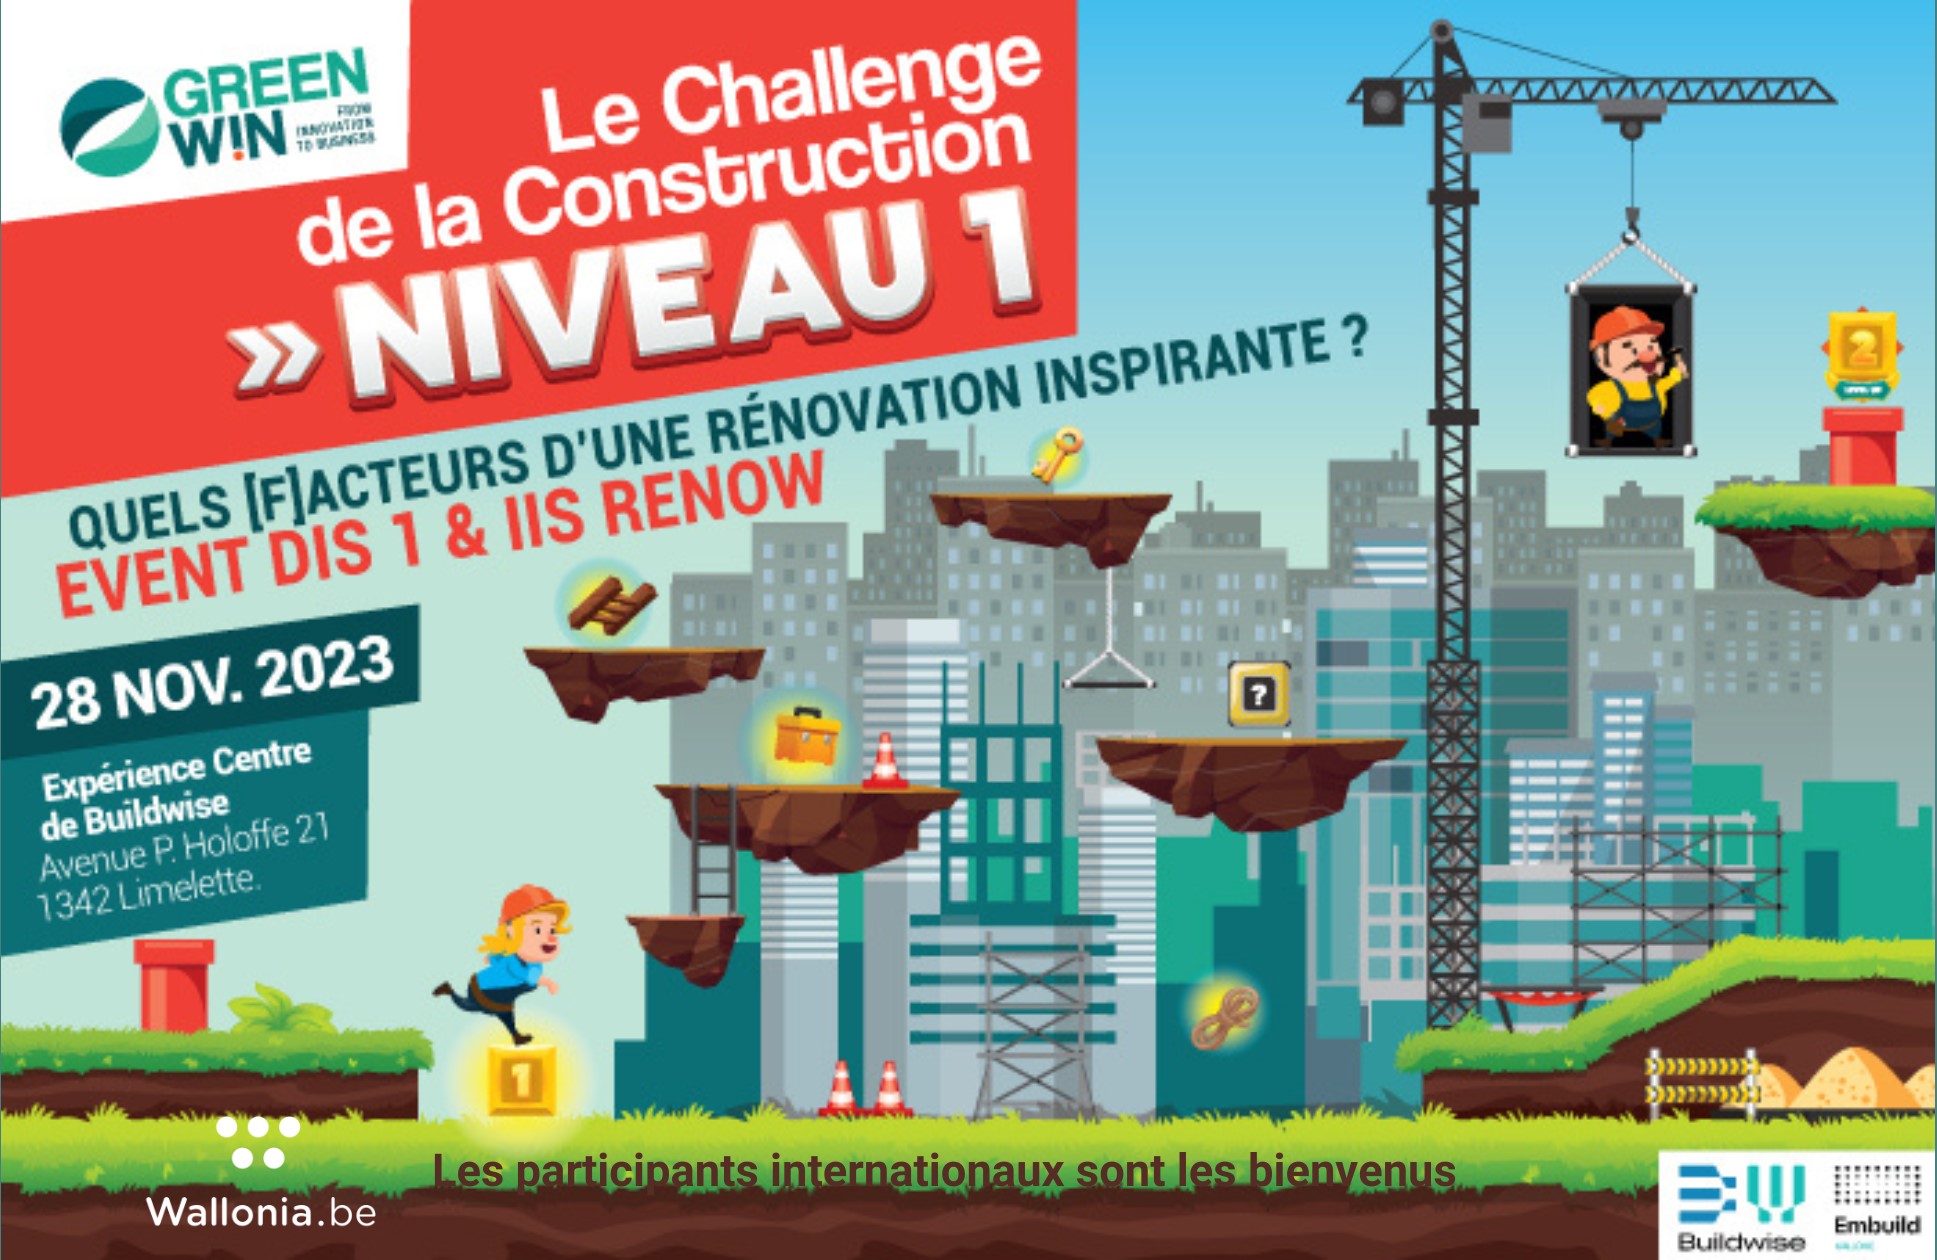 https://energie.wallonie.be/servlet/Repository/pave-challenge-construction.?IDR=63717&ID=77526&IDQ=20&LANG=fr